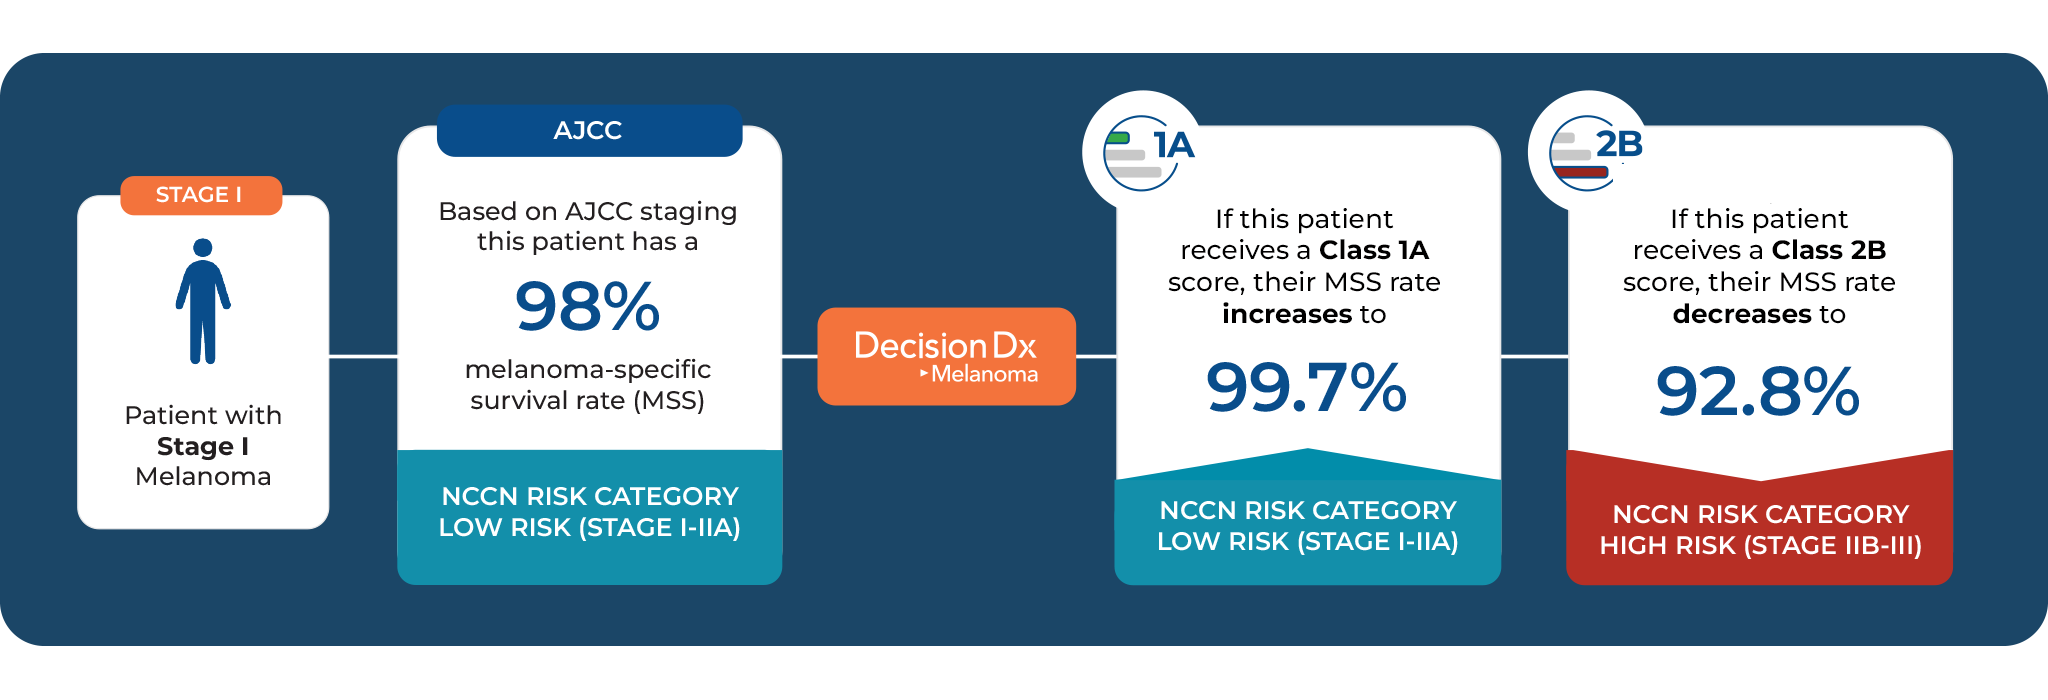 AJCC staging alone suggests a 98% survival rate for Stage I melanoma. Combined with DecisionDx class 1A results, the survival rate is 99.7%. Combine with DecisionDx class 2B results, the survival rate is 92.8%.